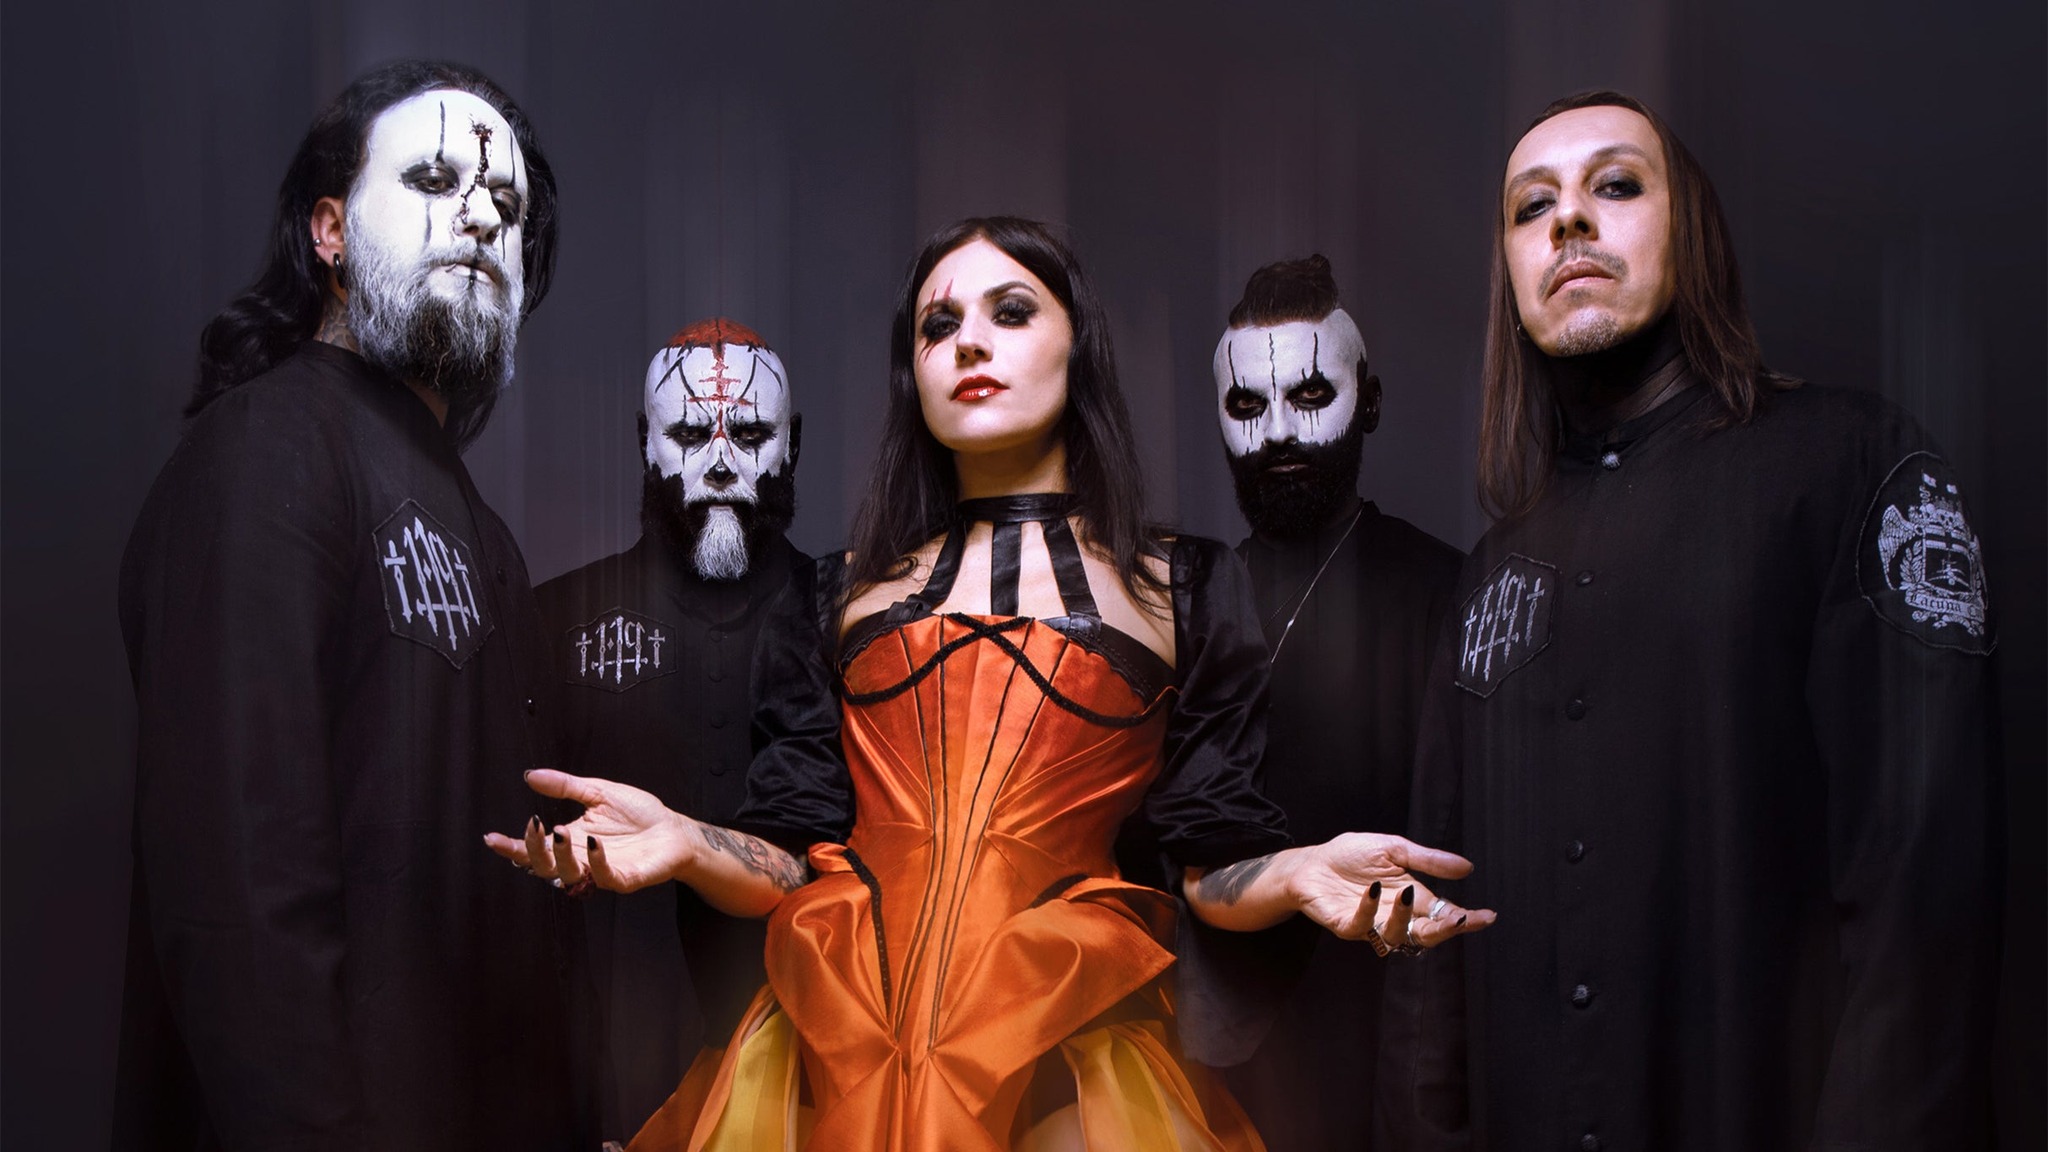 Lacuna Coil, New Years Day, & Oceans of Slumber